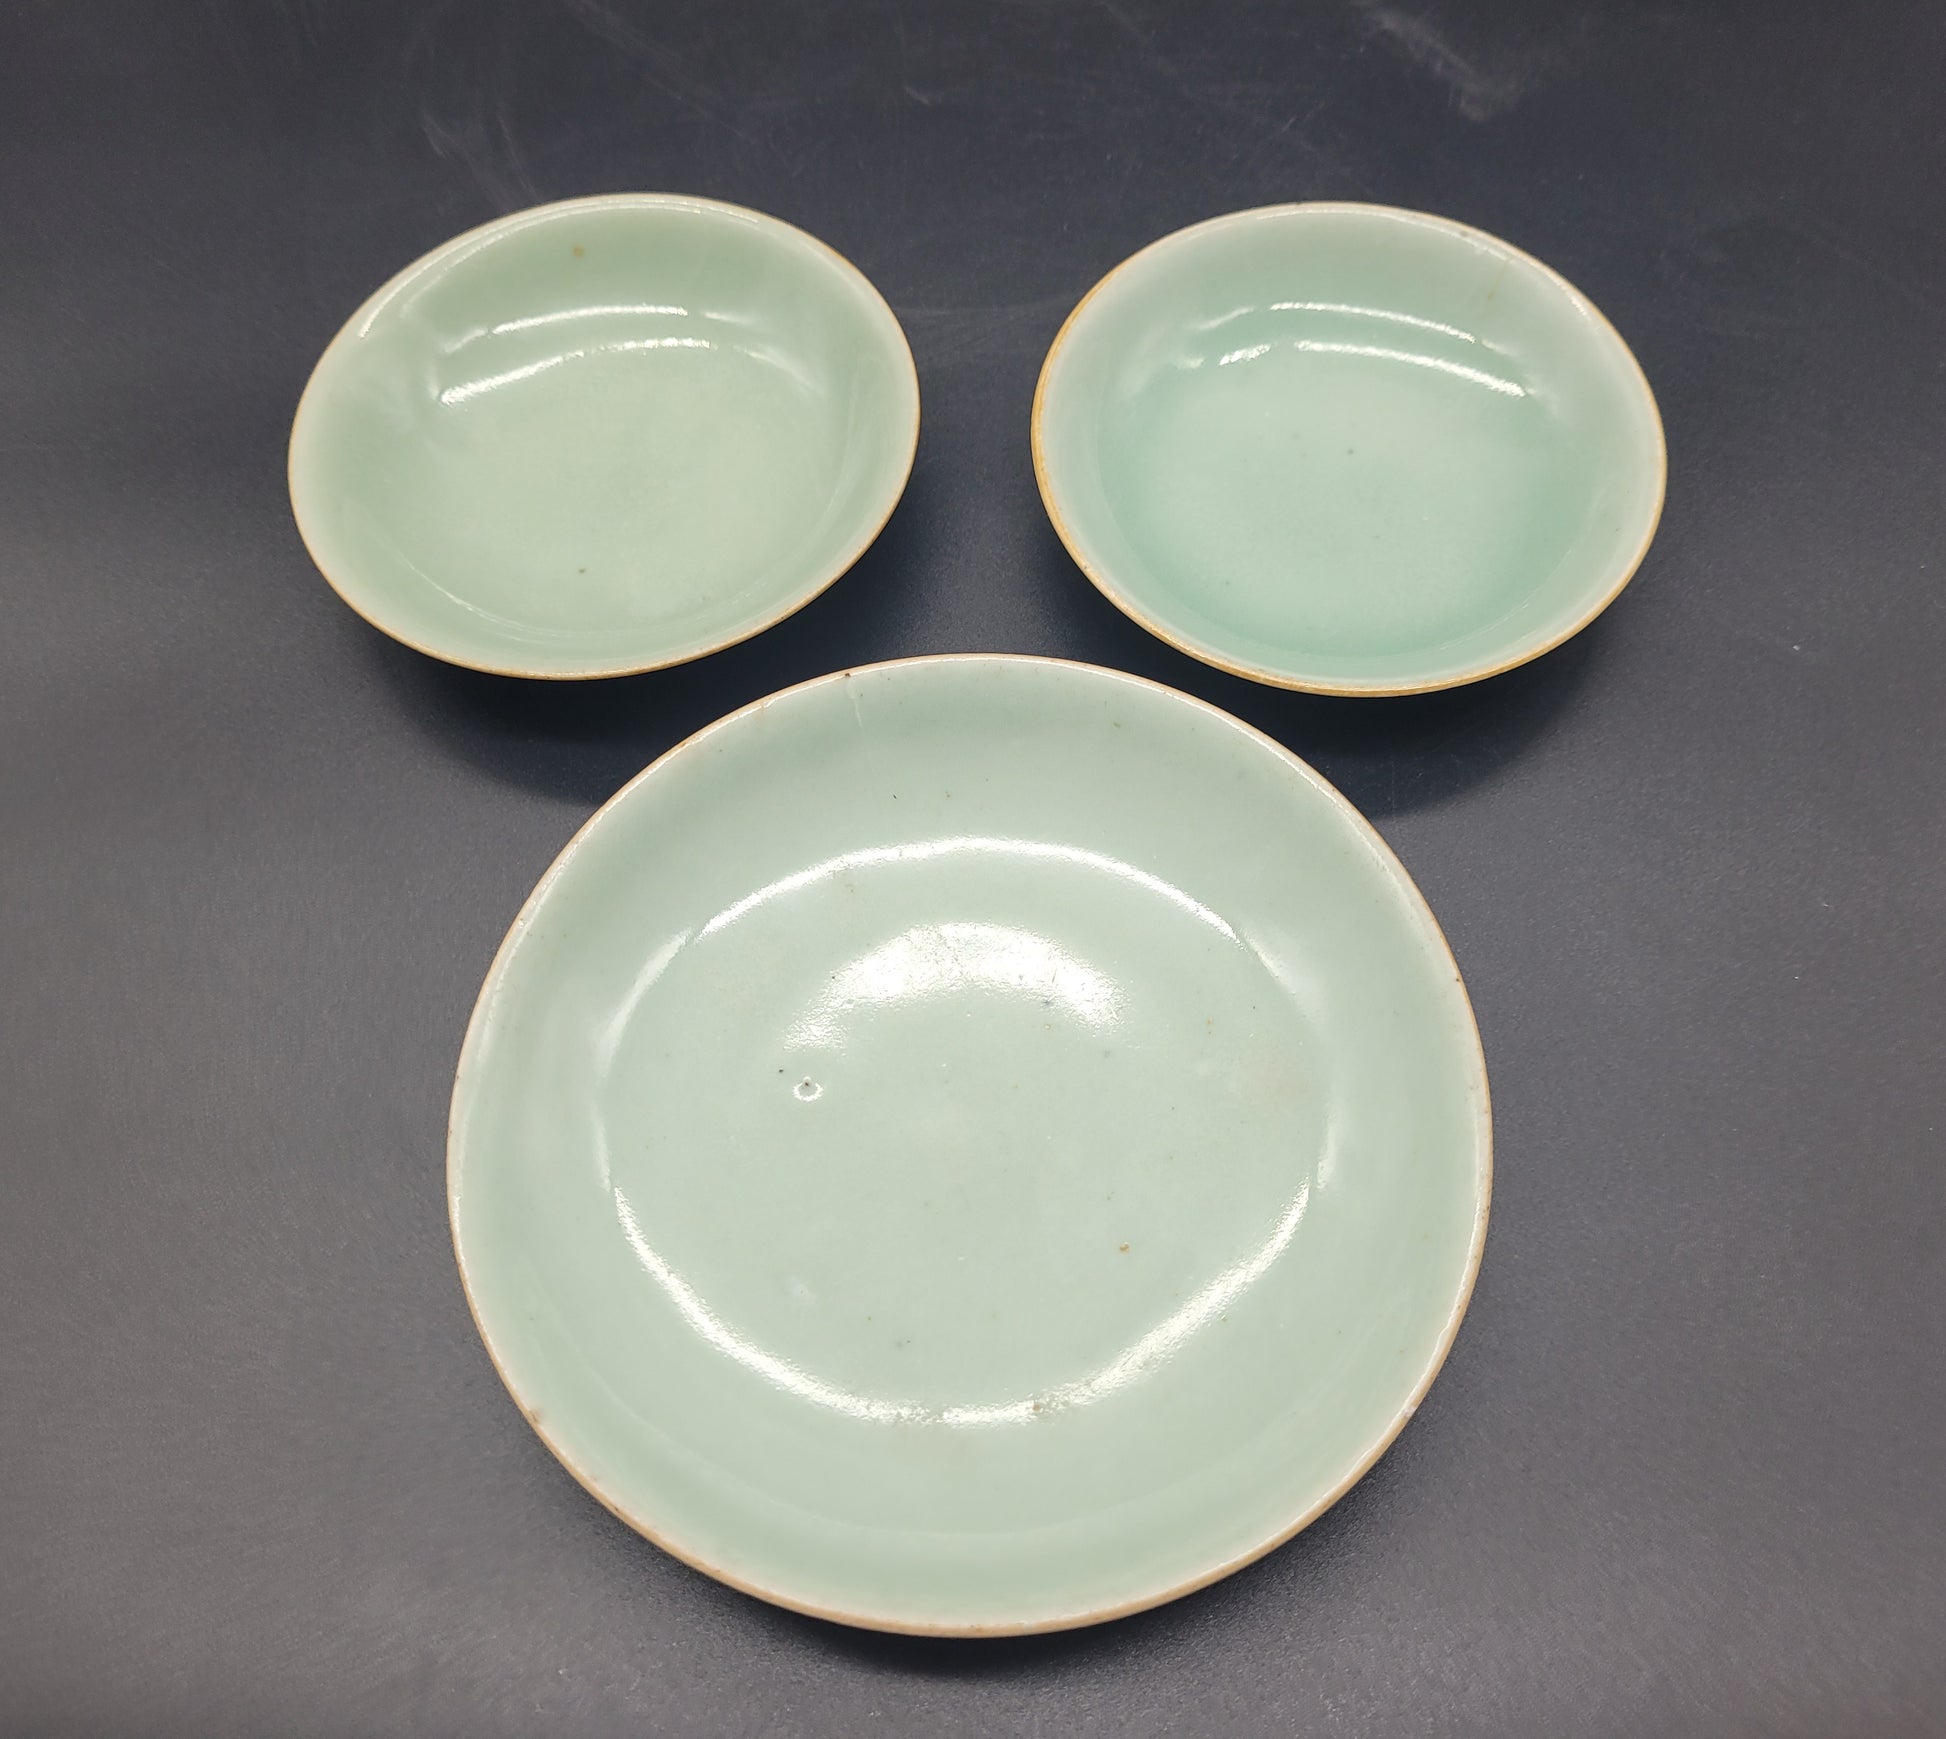 Antiques Online Three Really Nice Antique Chinese Longquan Celadon Plates / Bowls 